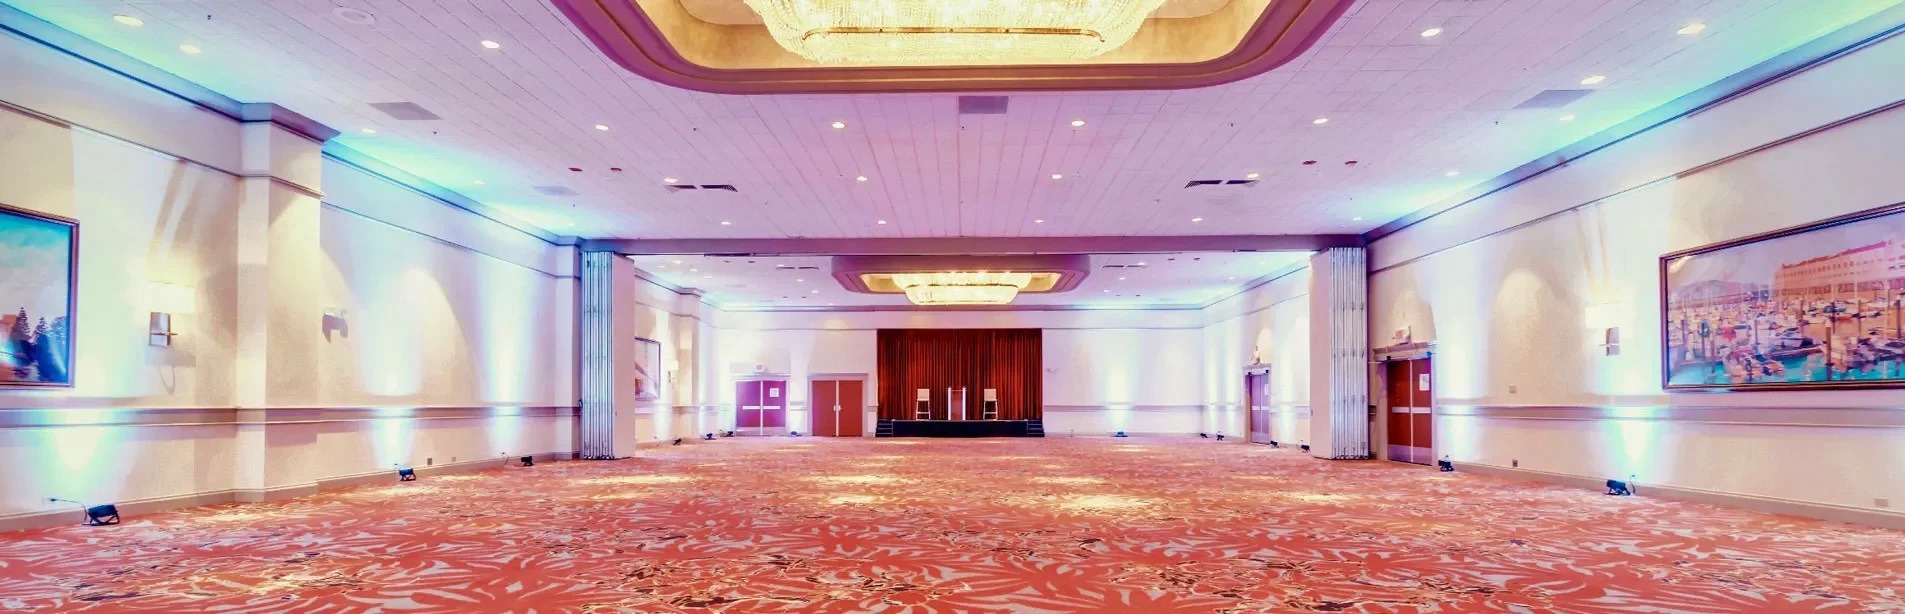 panoramic view of our empty ballroom and stage with highlight lights on